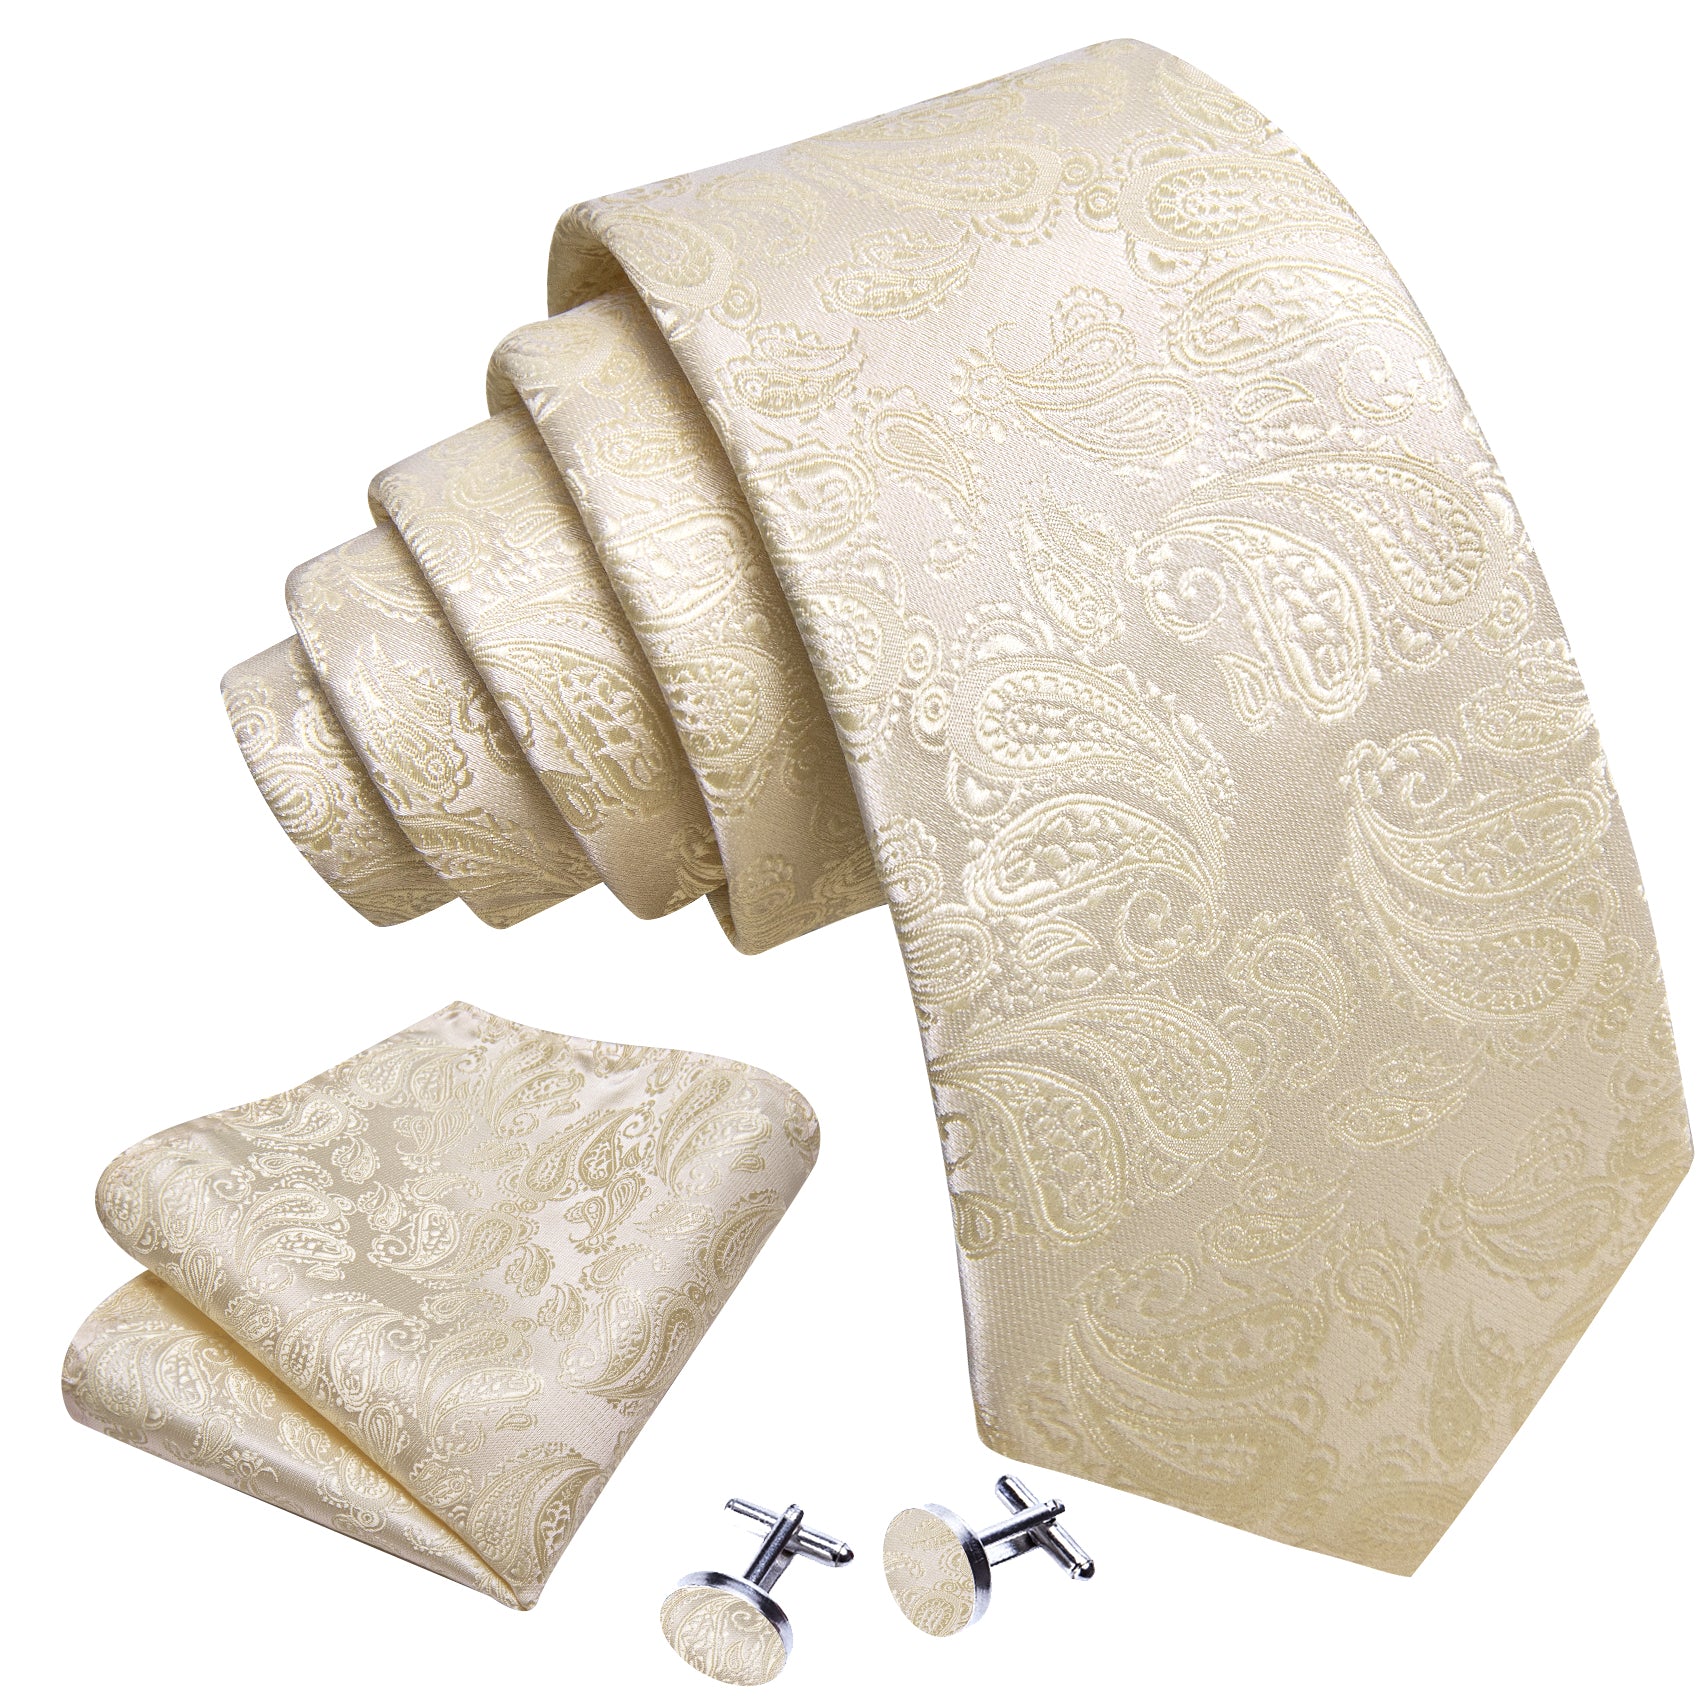 Champagne Paisley Silk 63 Inches Extra Long Tie Hanky Cufflinks Set